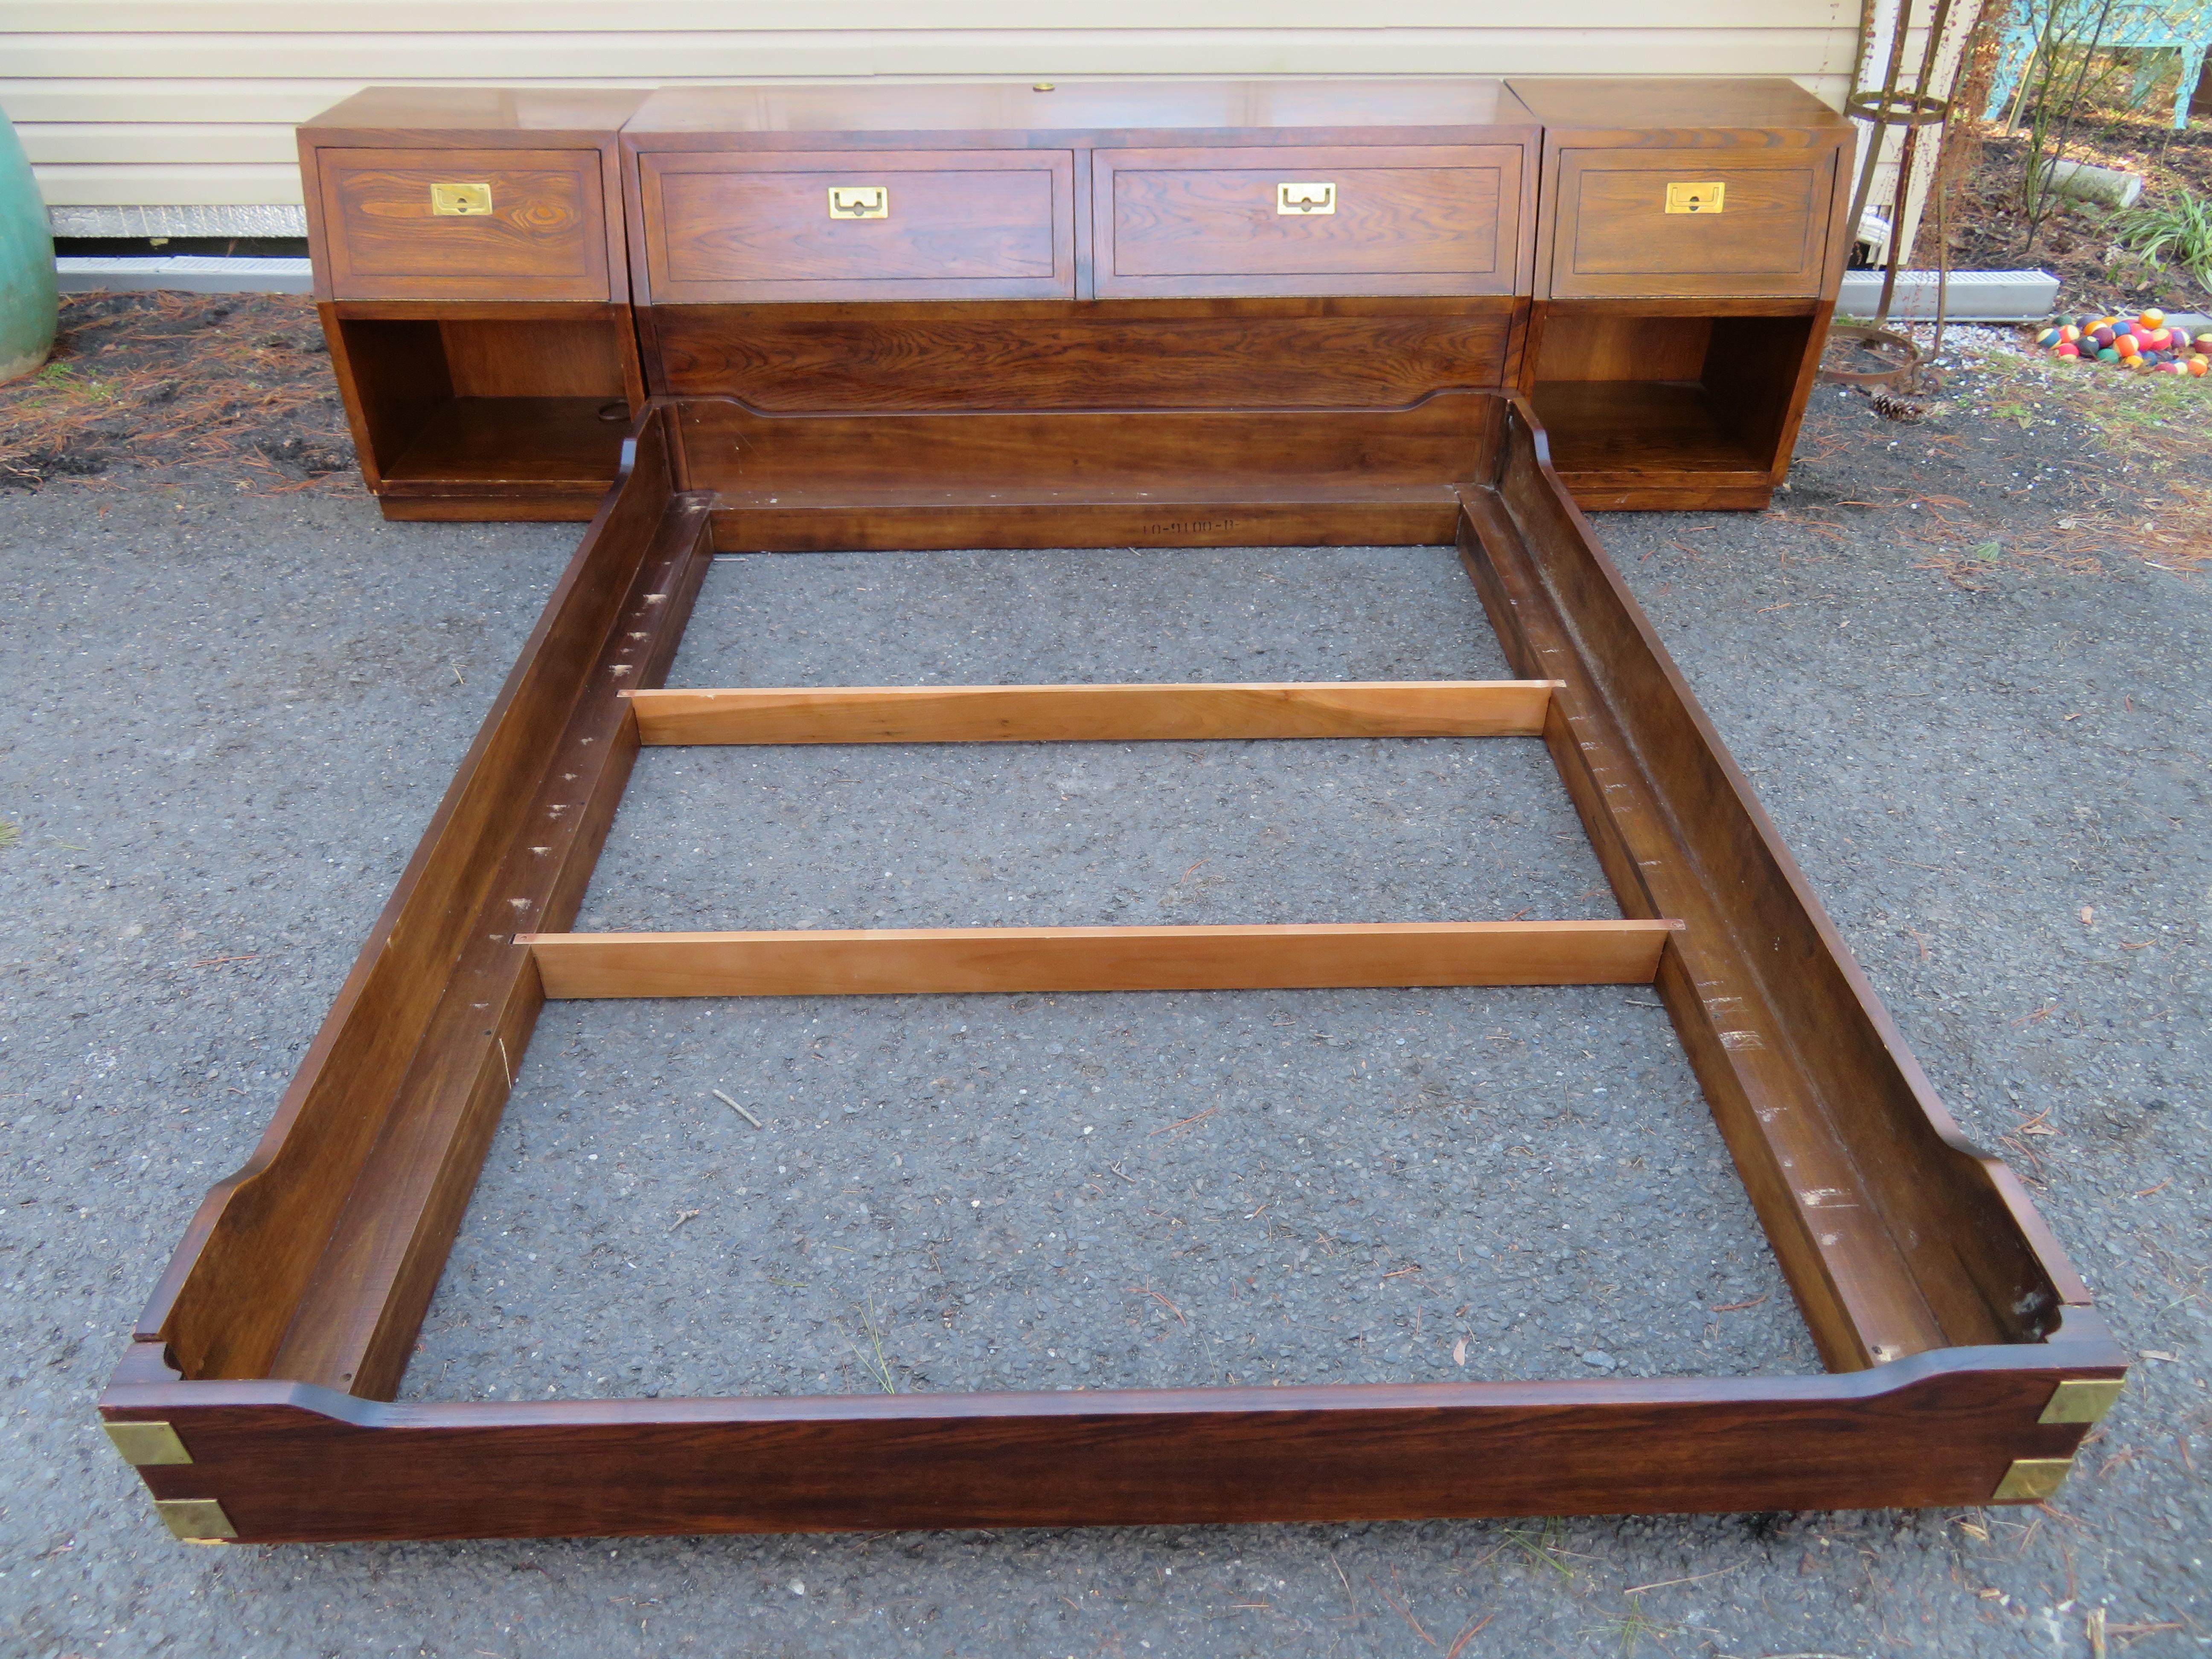 Highly sought after Henredon scene one queen size headboard/ platform bed with storage inside the headboard. This set includes the matching nightstands wired with electrical outlets in both stands and in the headboard. This set measures 27